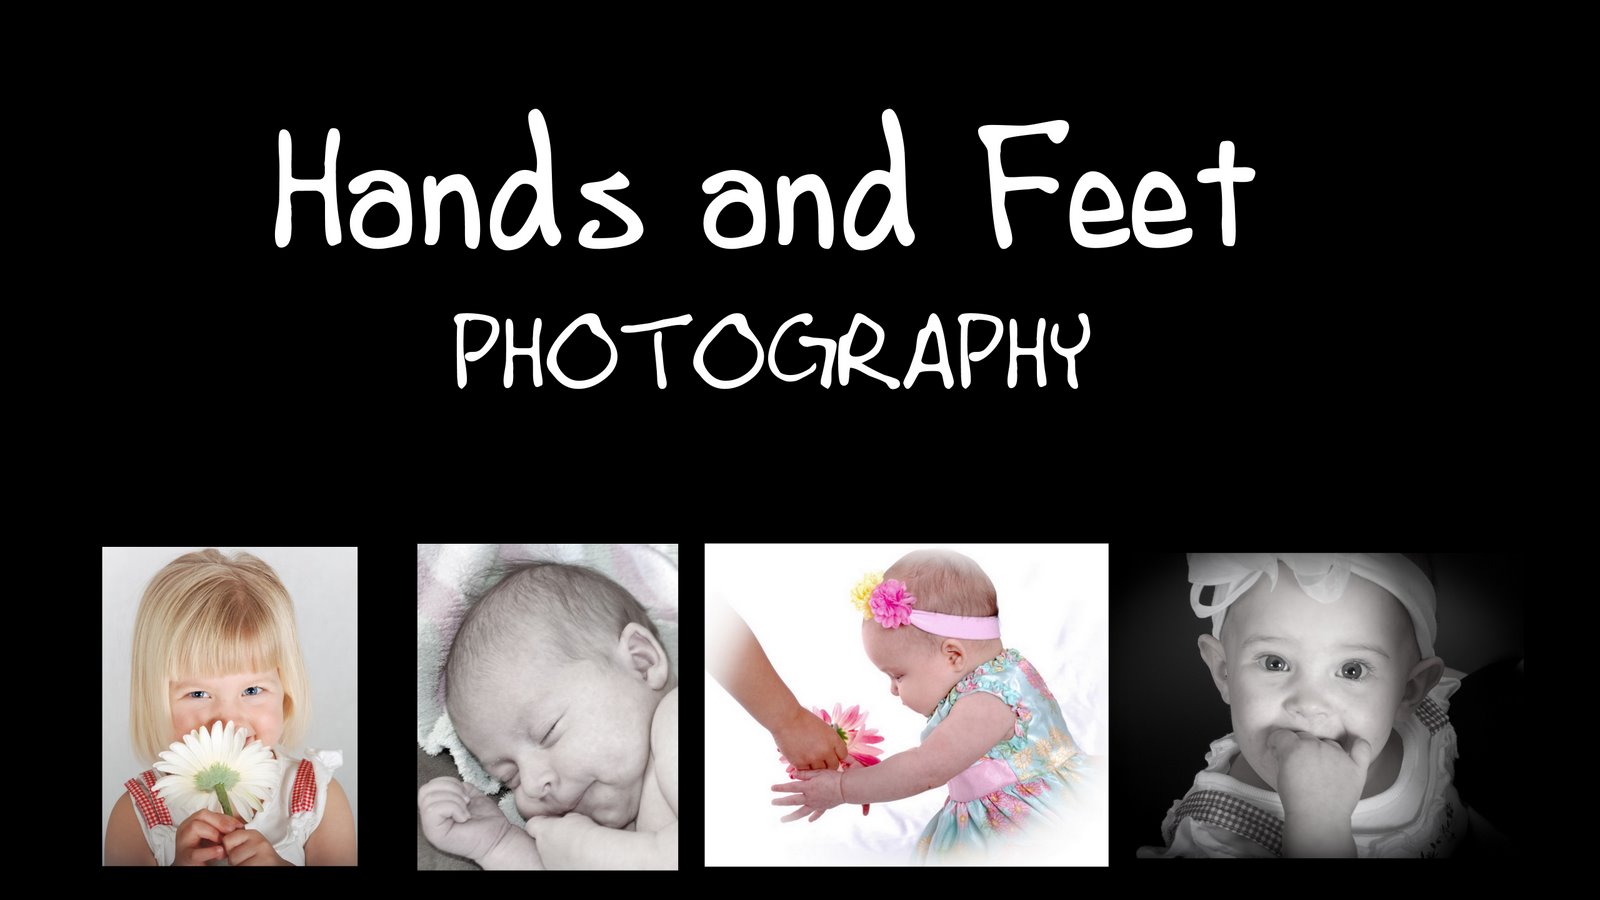 Hands and Feet Photography Announcements